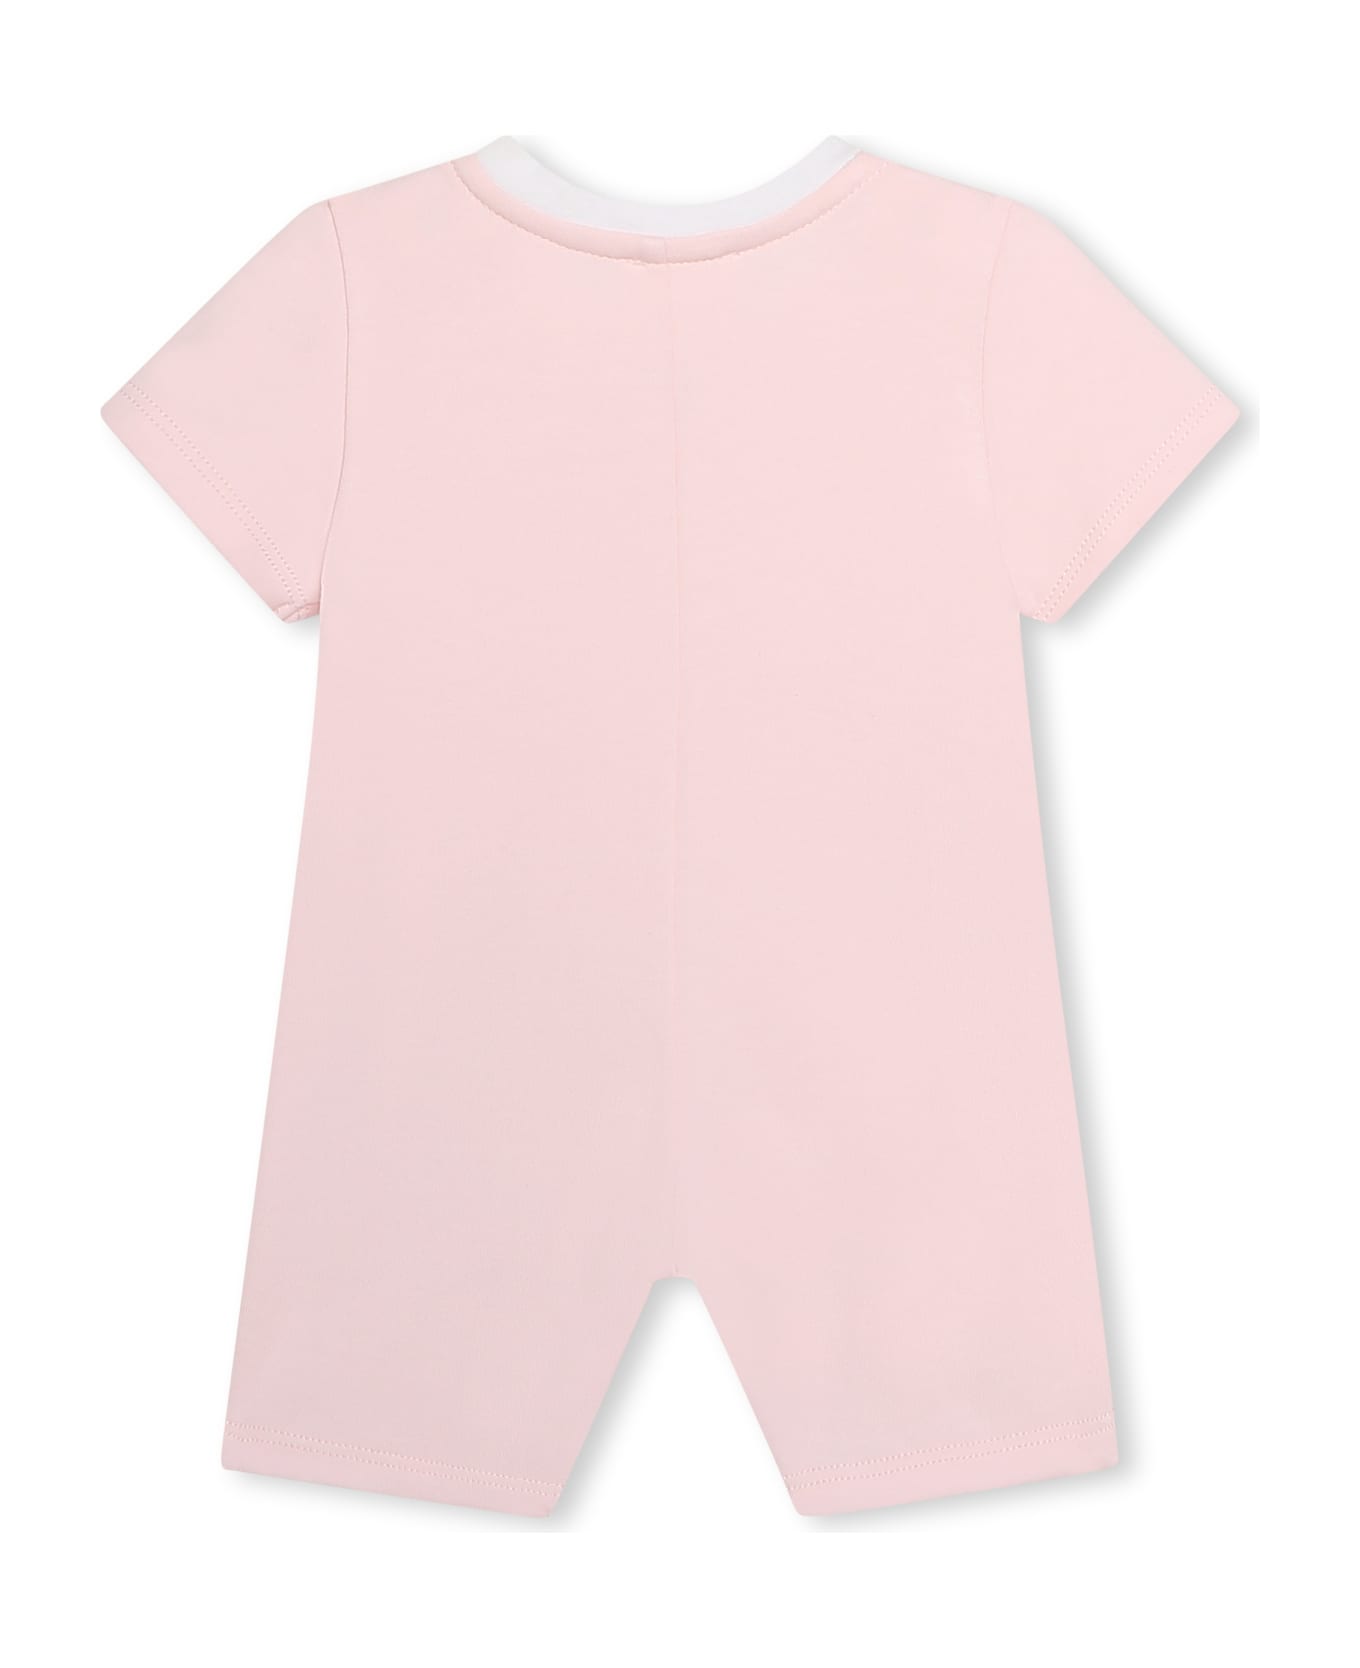 Givenchy hats Printed Romper - Pink